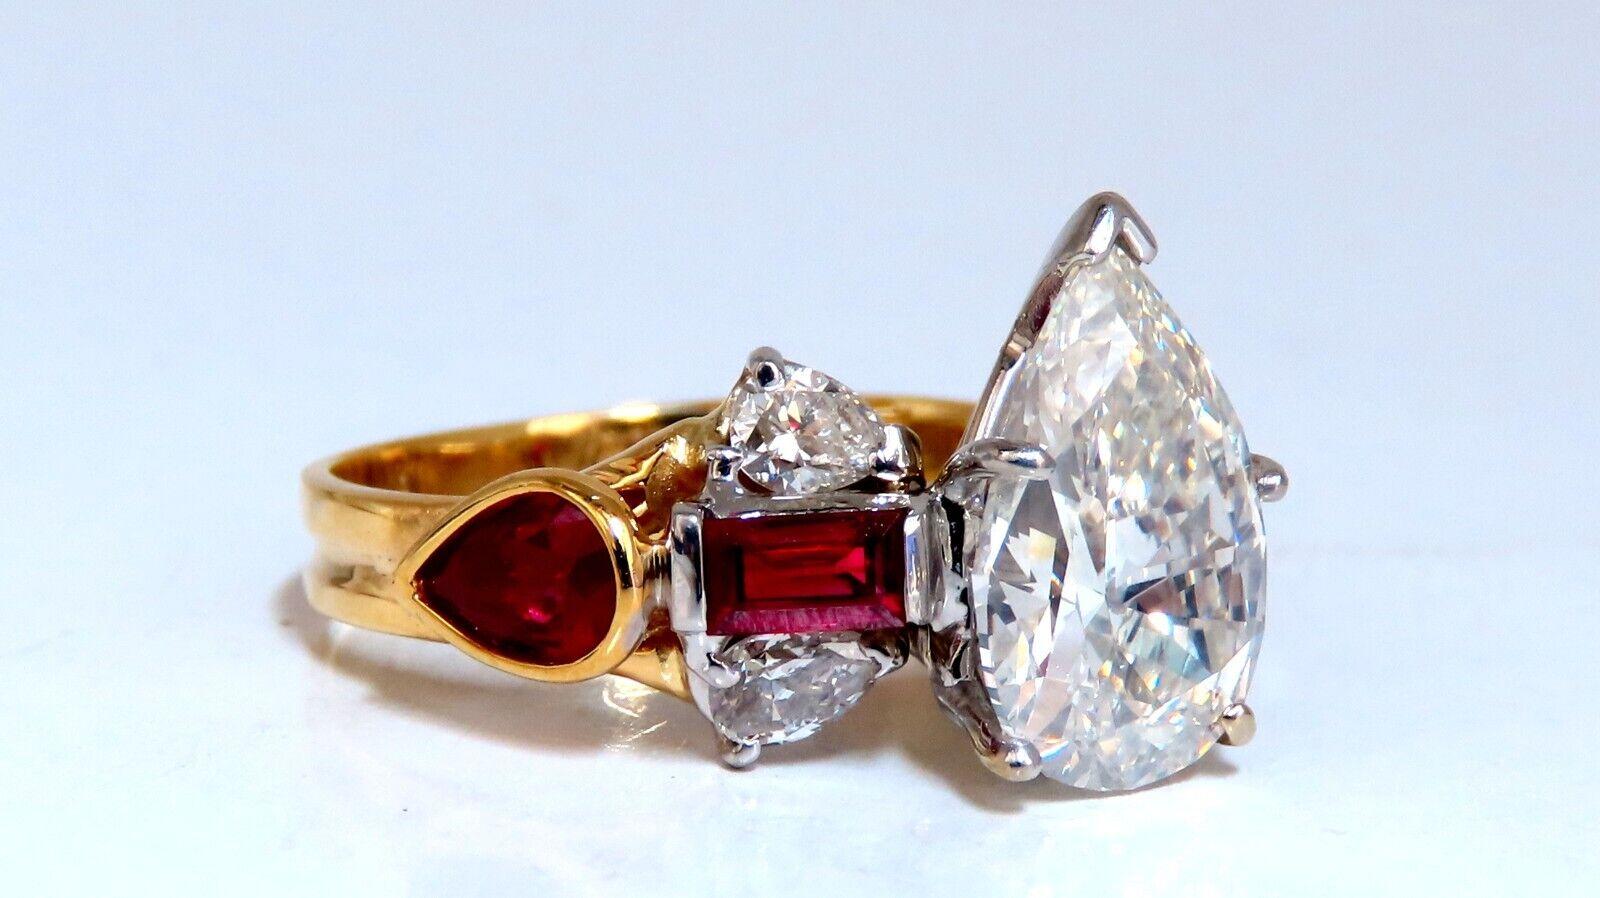 Three Stone Pears & Reds

2.64ct. Natural Pear diamond ring

GIA Certificate # 5221172632

J-color

 Si1 clarity

good Cut / Full cut Brilliant

Very Strong Blue Flouresence

1.50ct Side natural (4) Rubies

Vivid Deep Reds & Clean Clarity.

Baguette